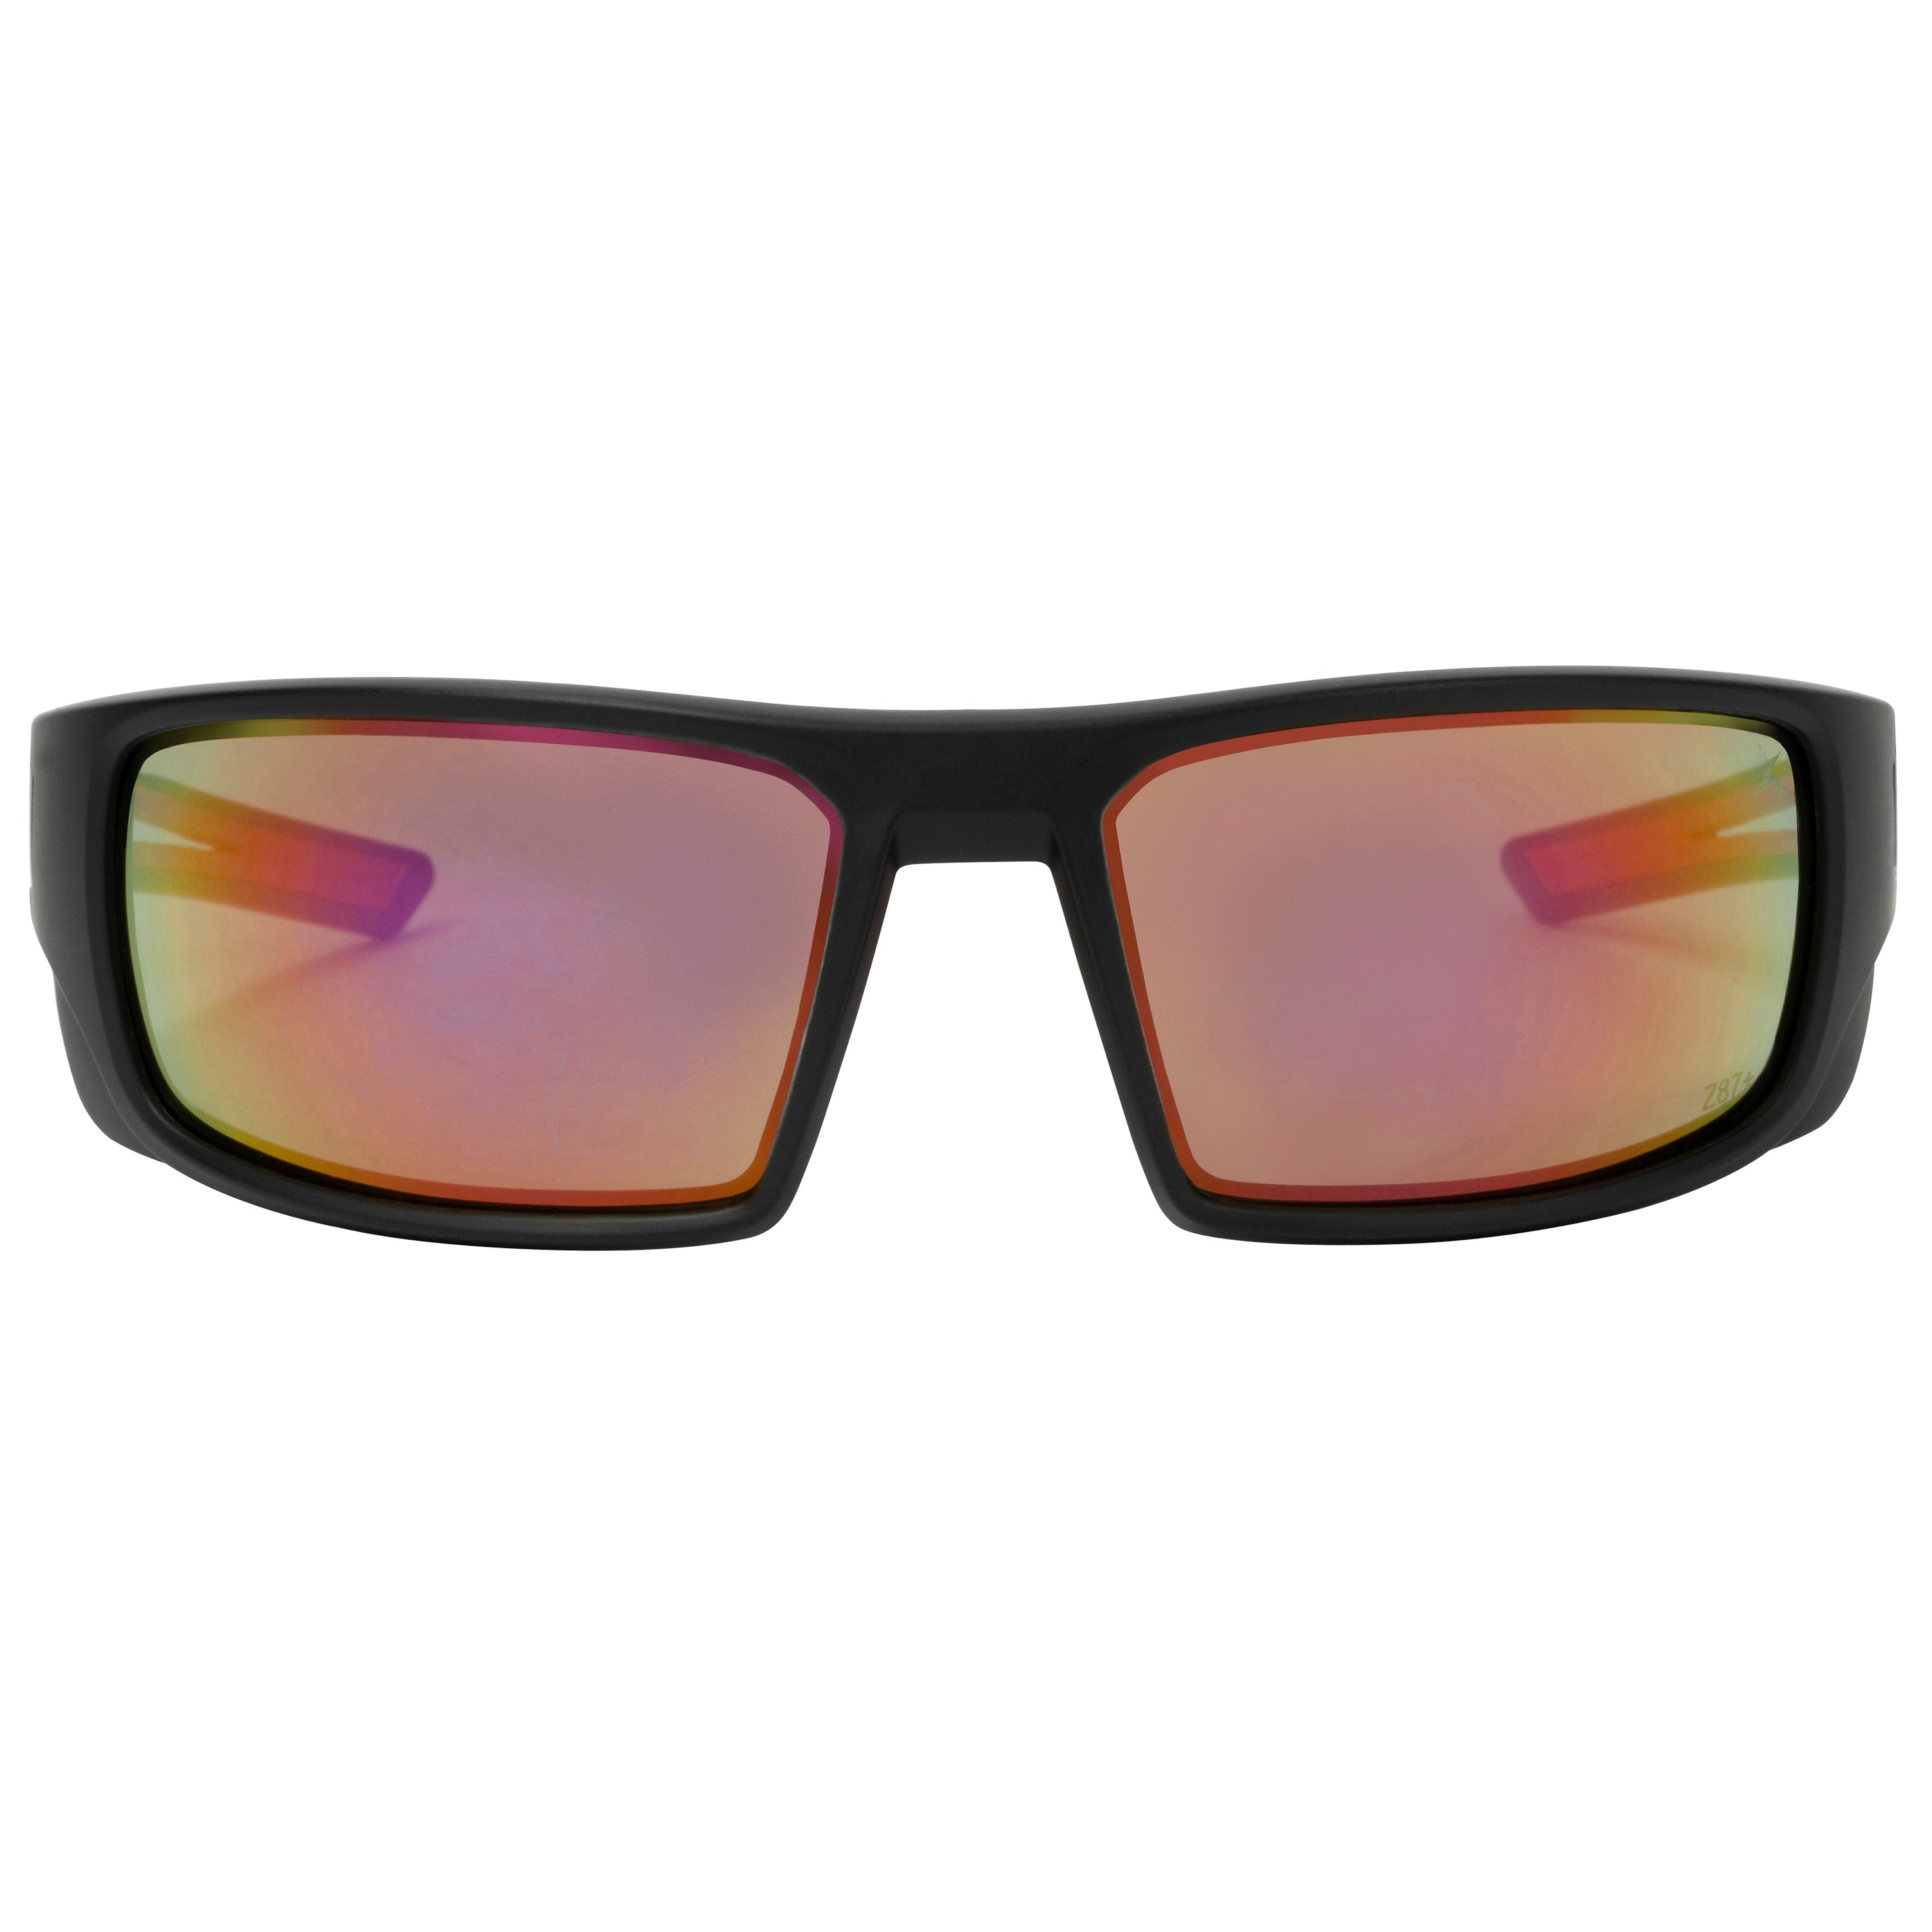 Red Mirror Lens Sport Safety Sunglasses with Red Rubber Accents.